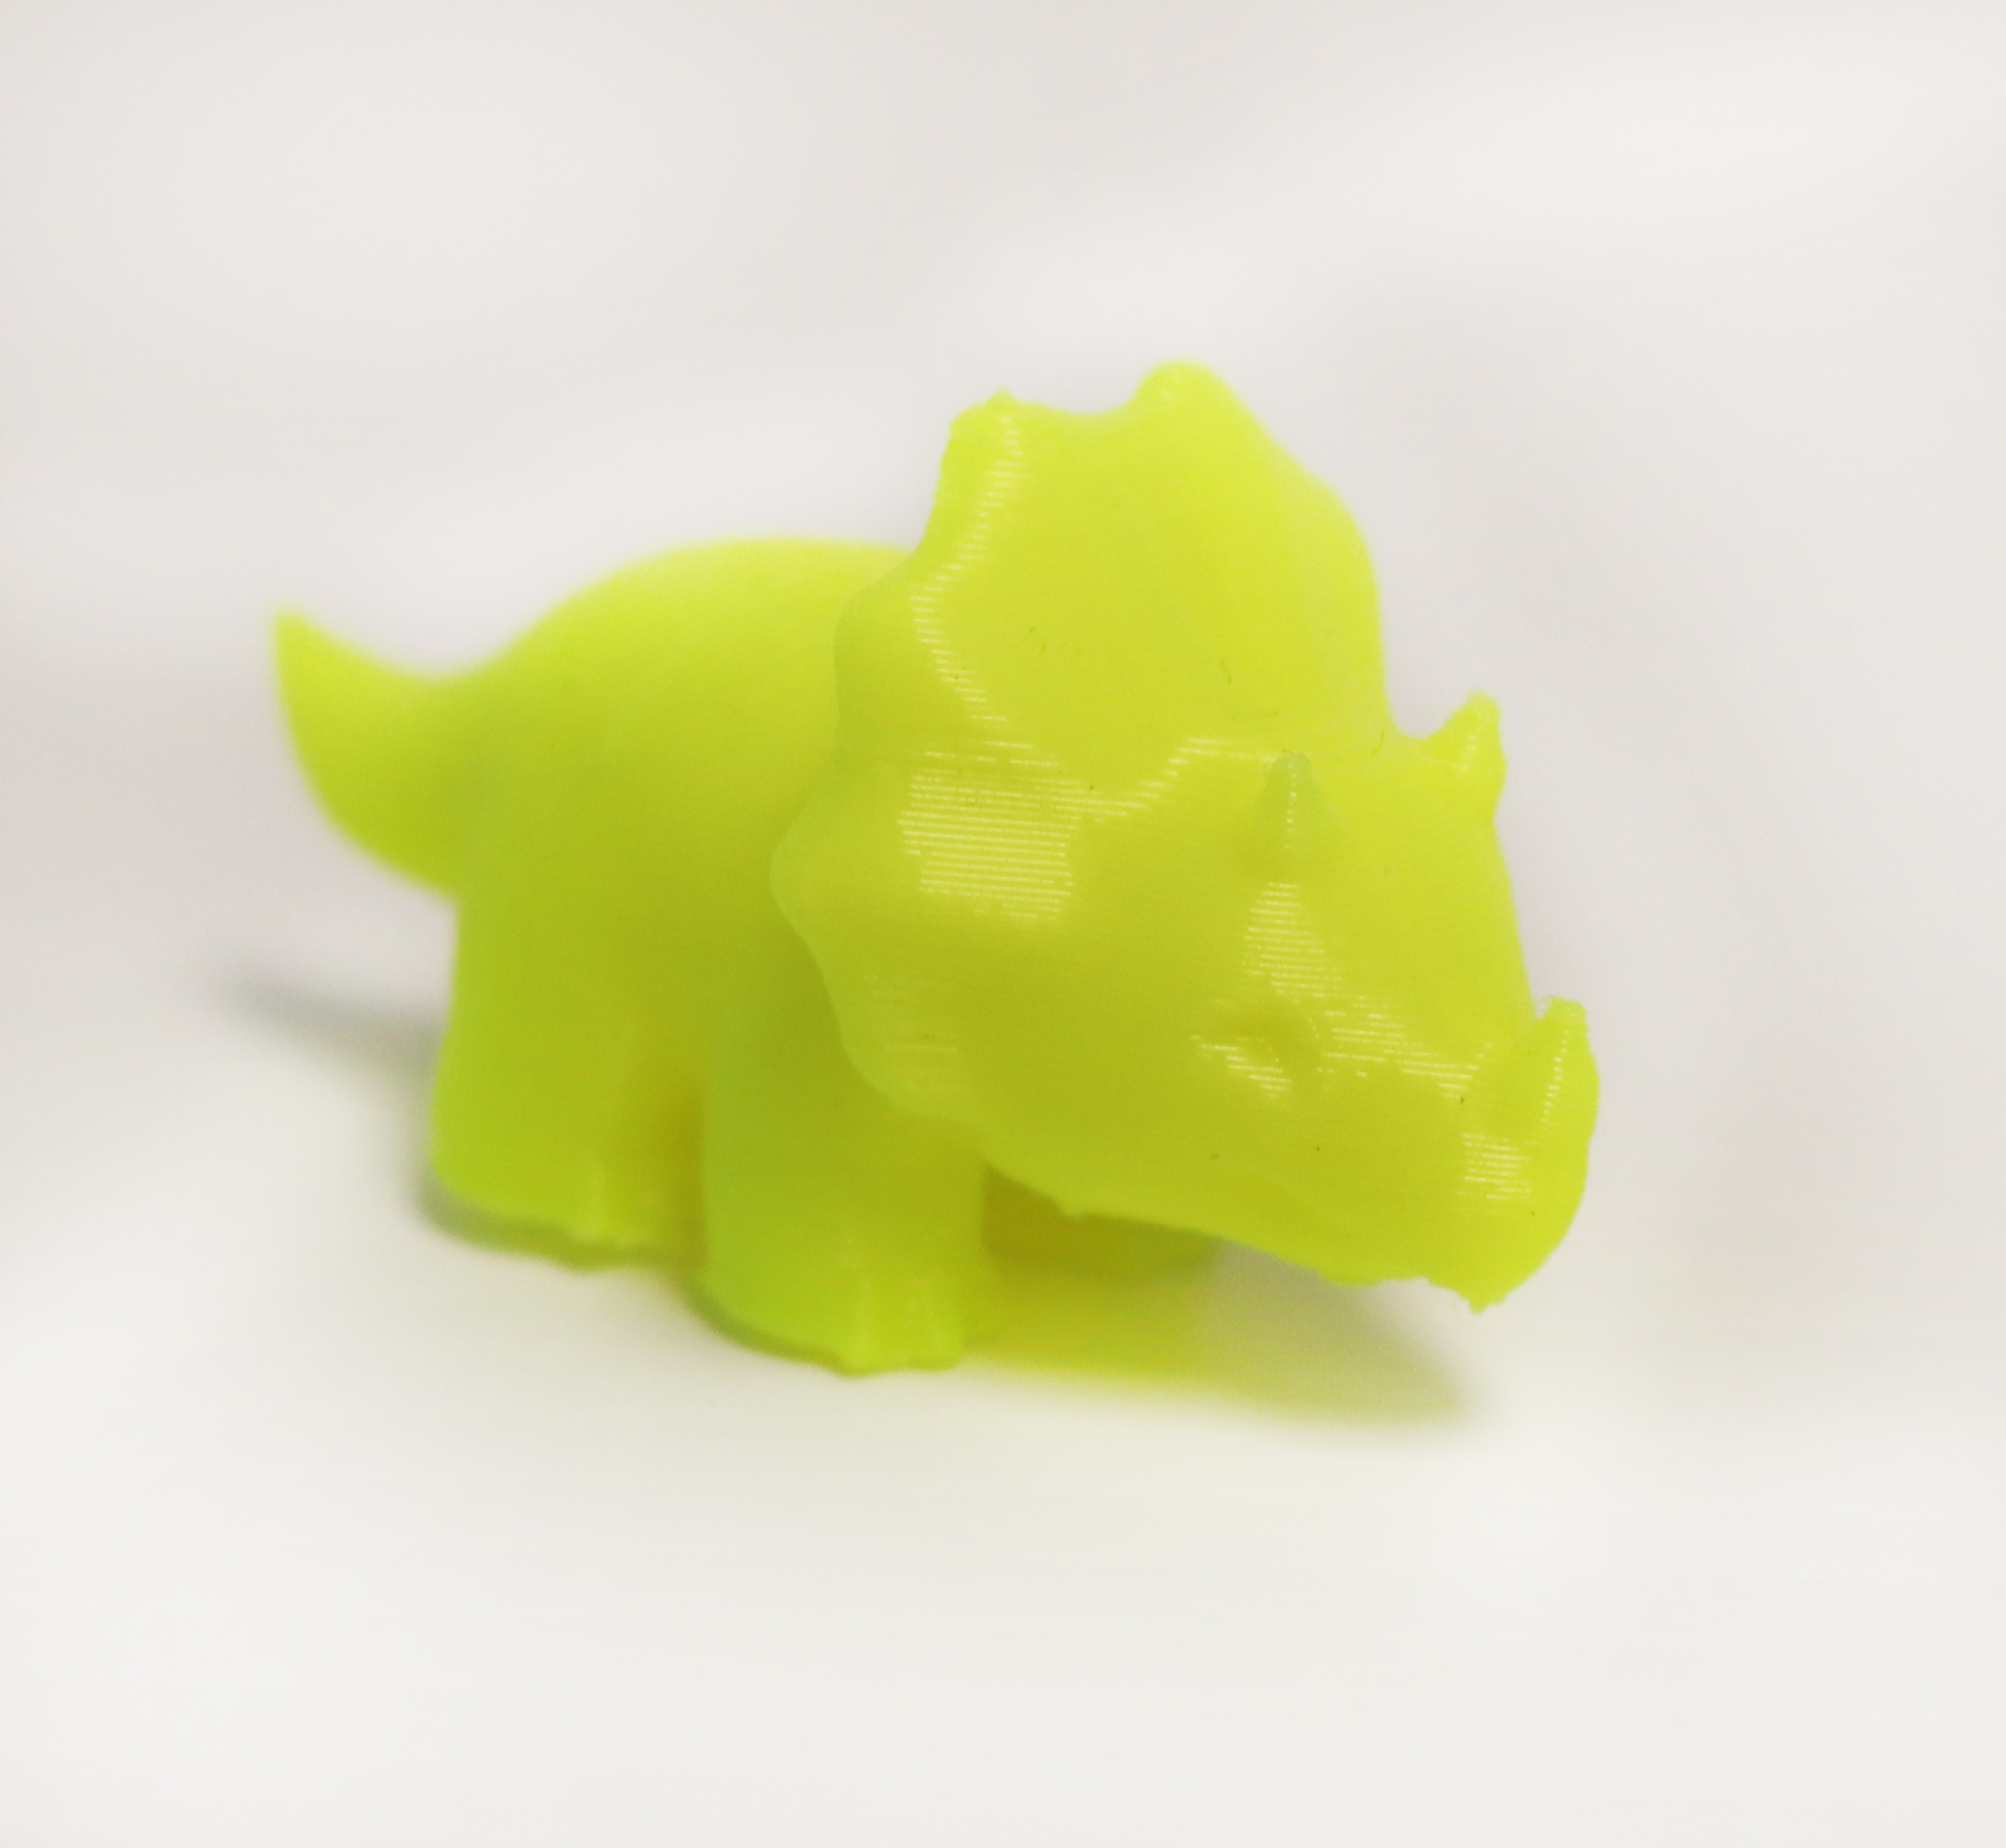 A neon yellow triceratops 3D printable. 